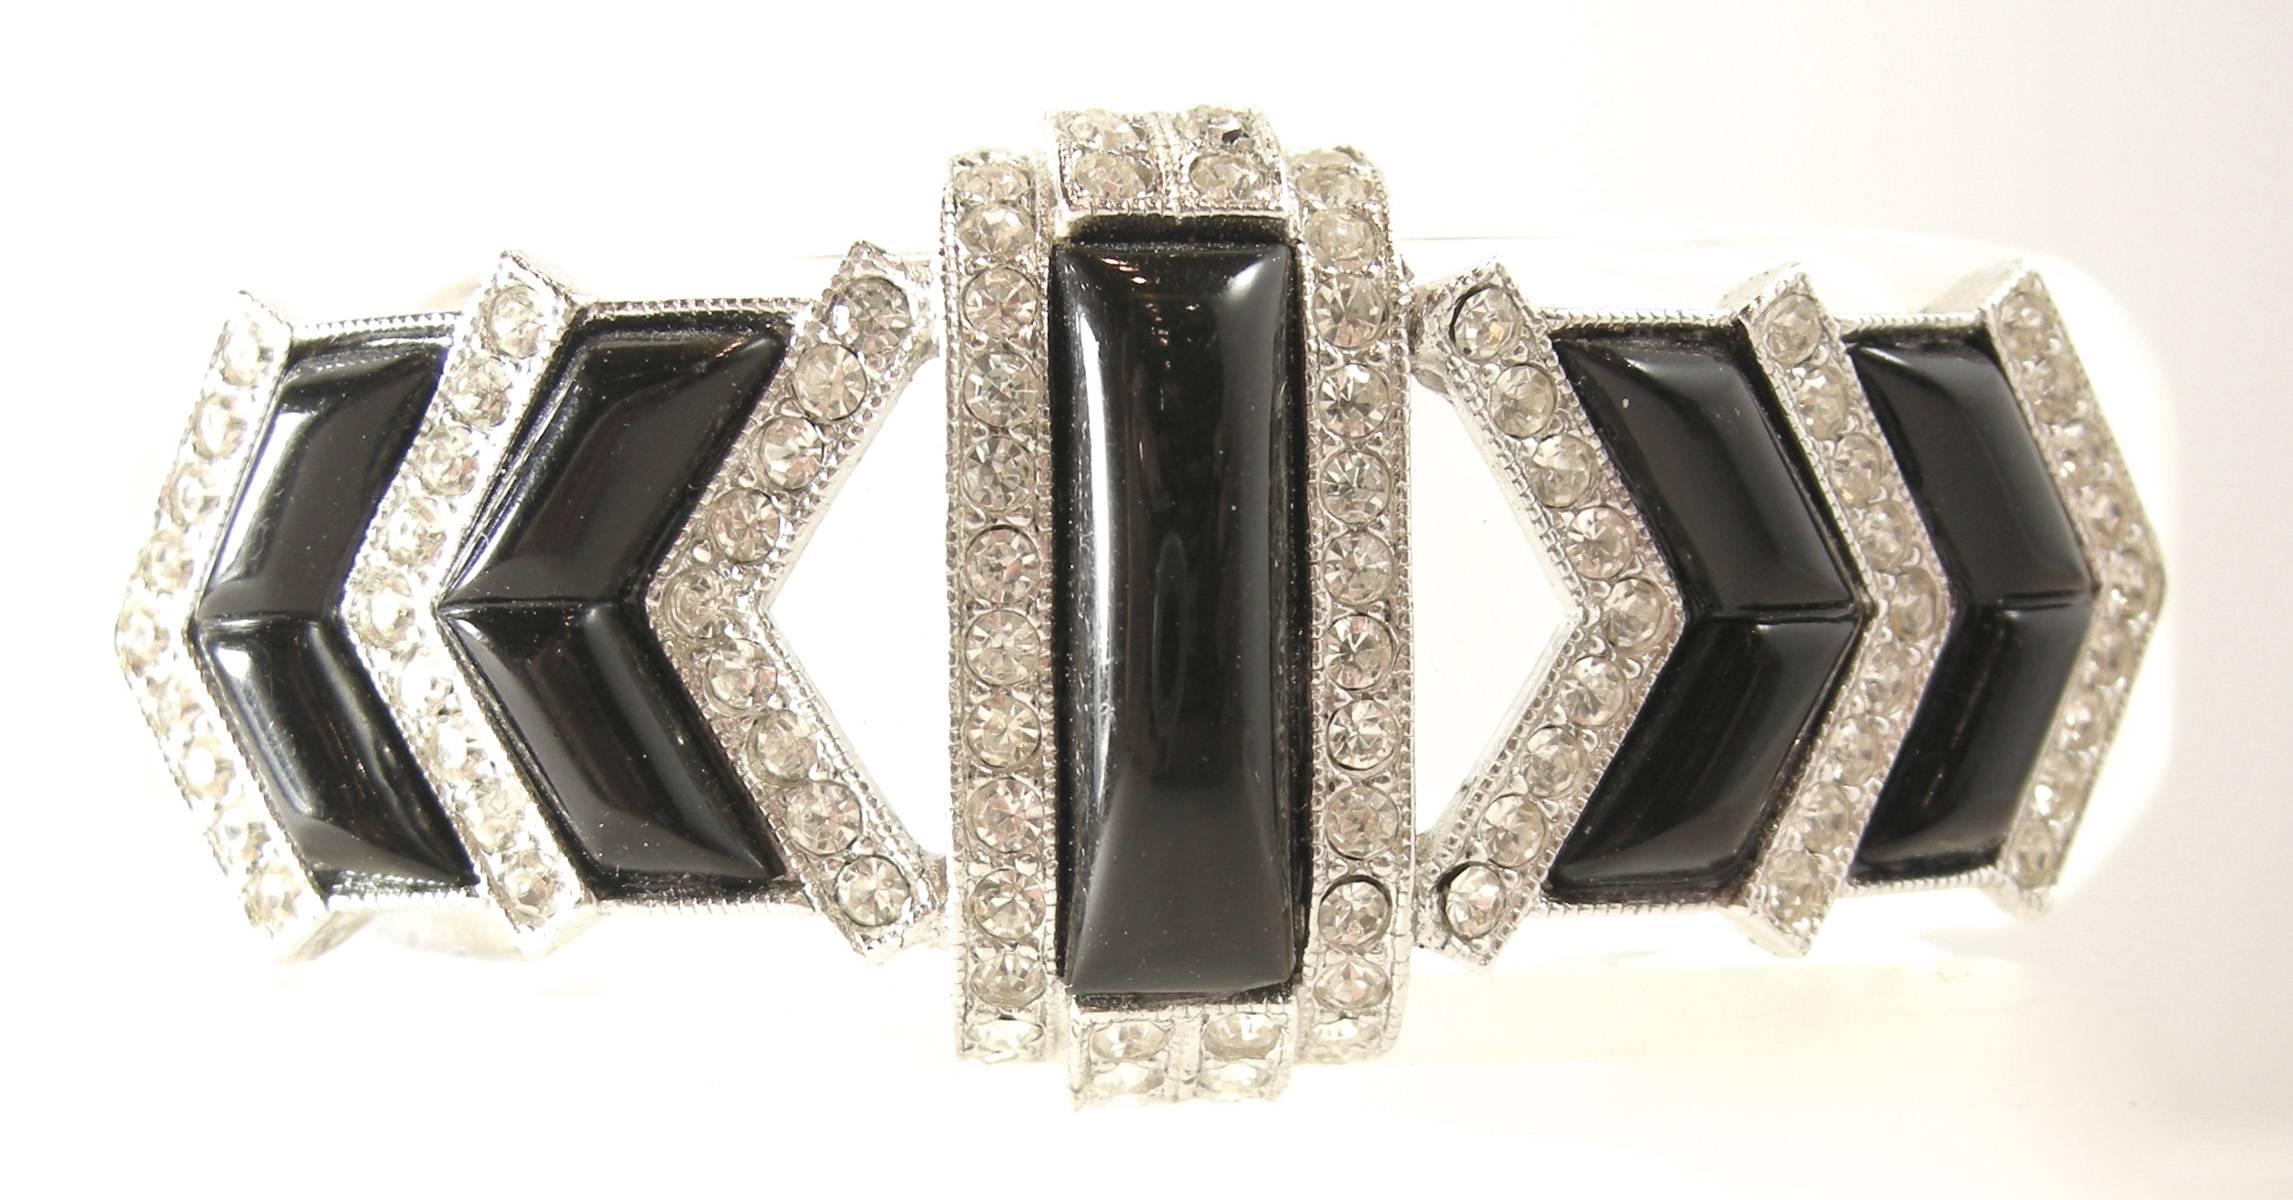 This Lucite hinged cuff bracelet has an art deco feel to it. It has faux onyx and is adorned with vibrant rhinestones.  It can fit a wrist size up to 8” and measures 9